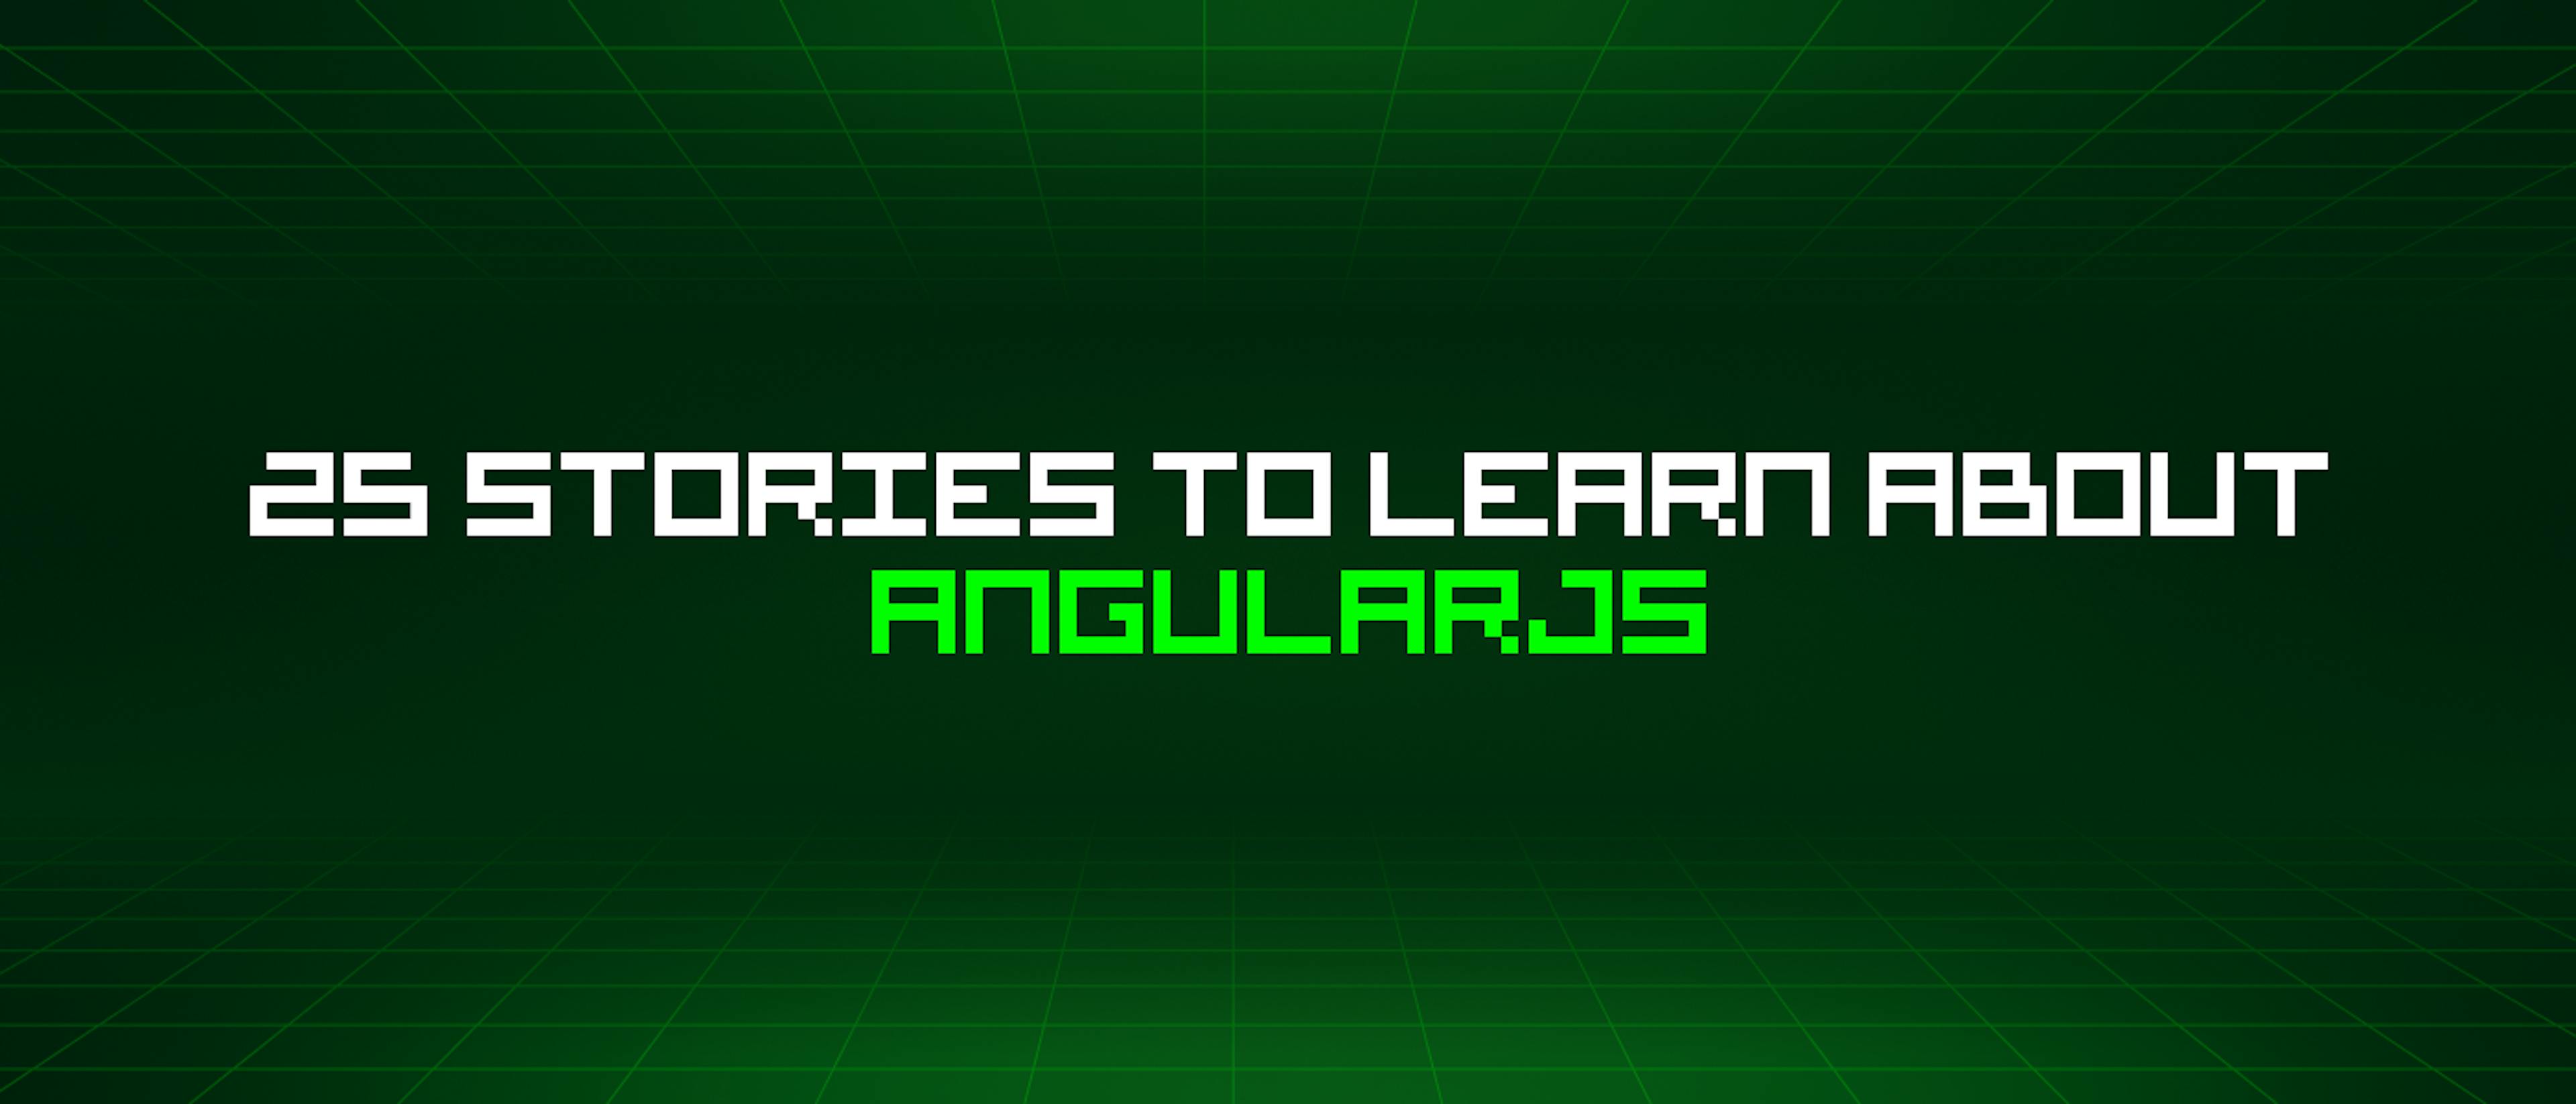 featured image - 25 Stories To Learn About Angularjs